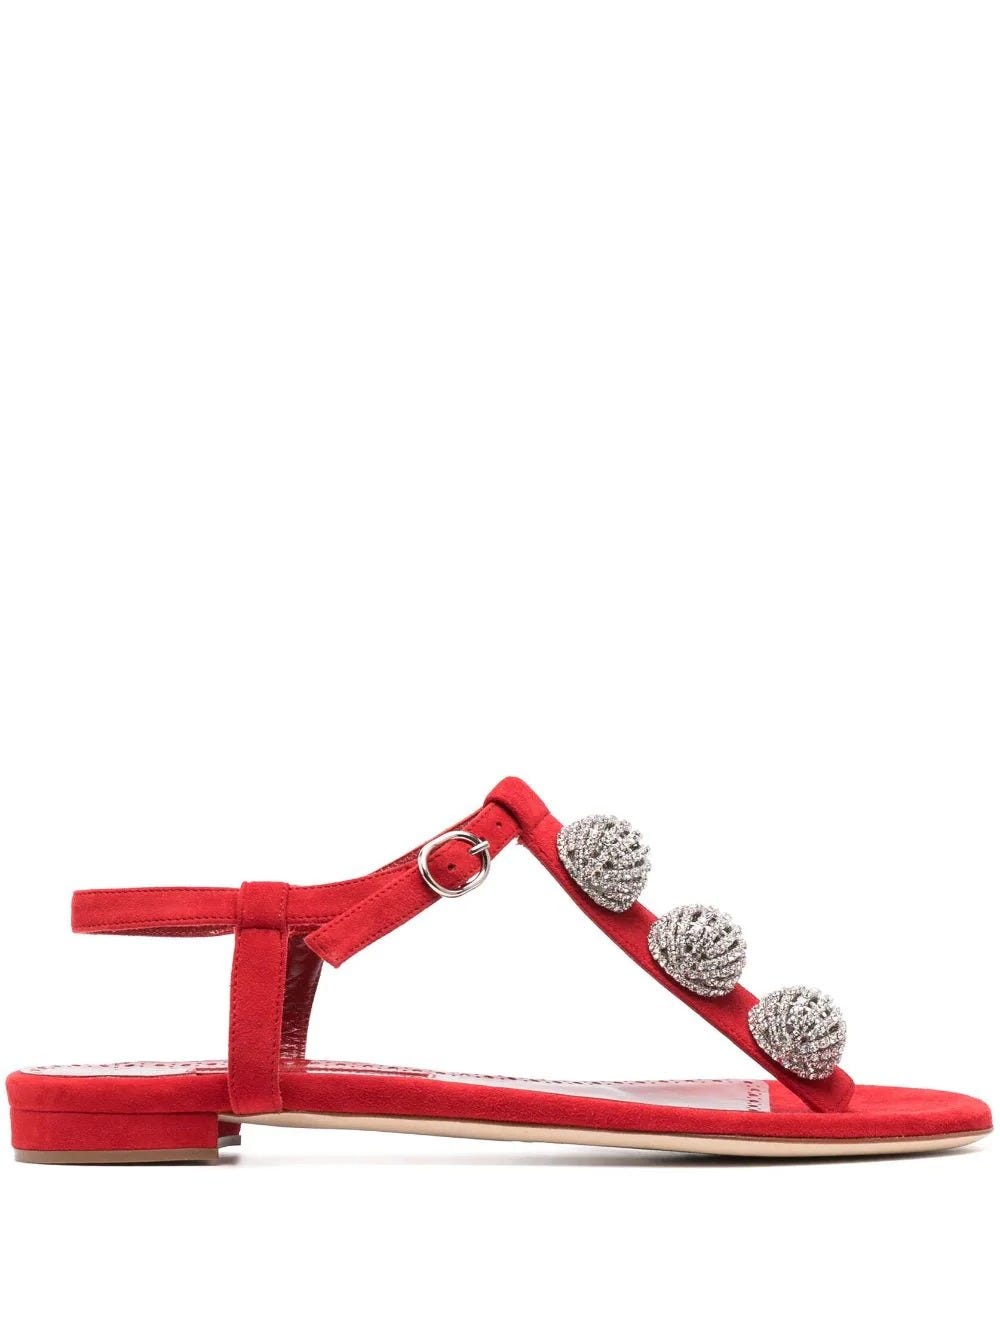 MANOLO BLAHNIK RED LOW SANDALS WITH JEWEL DECORATION